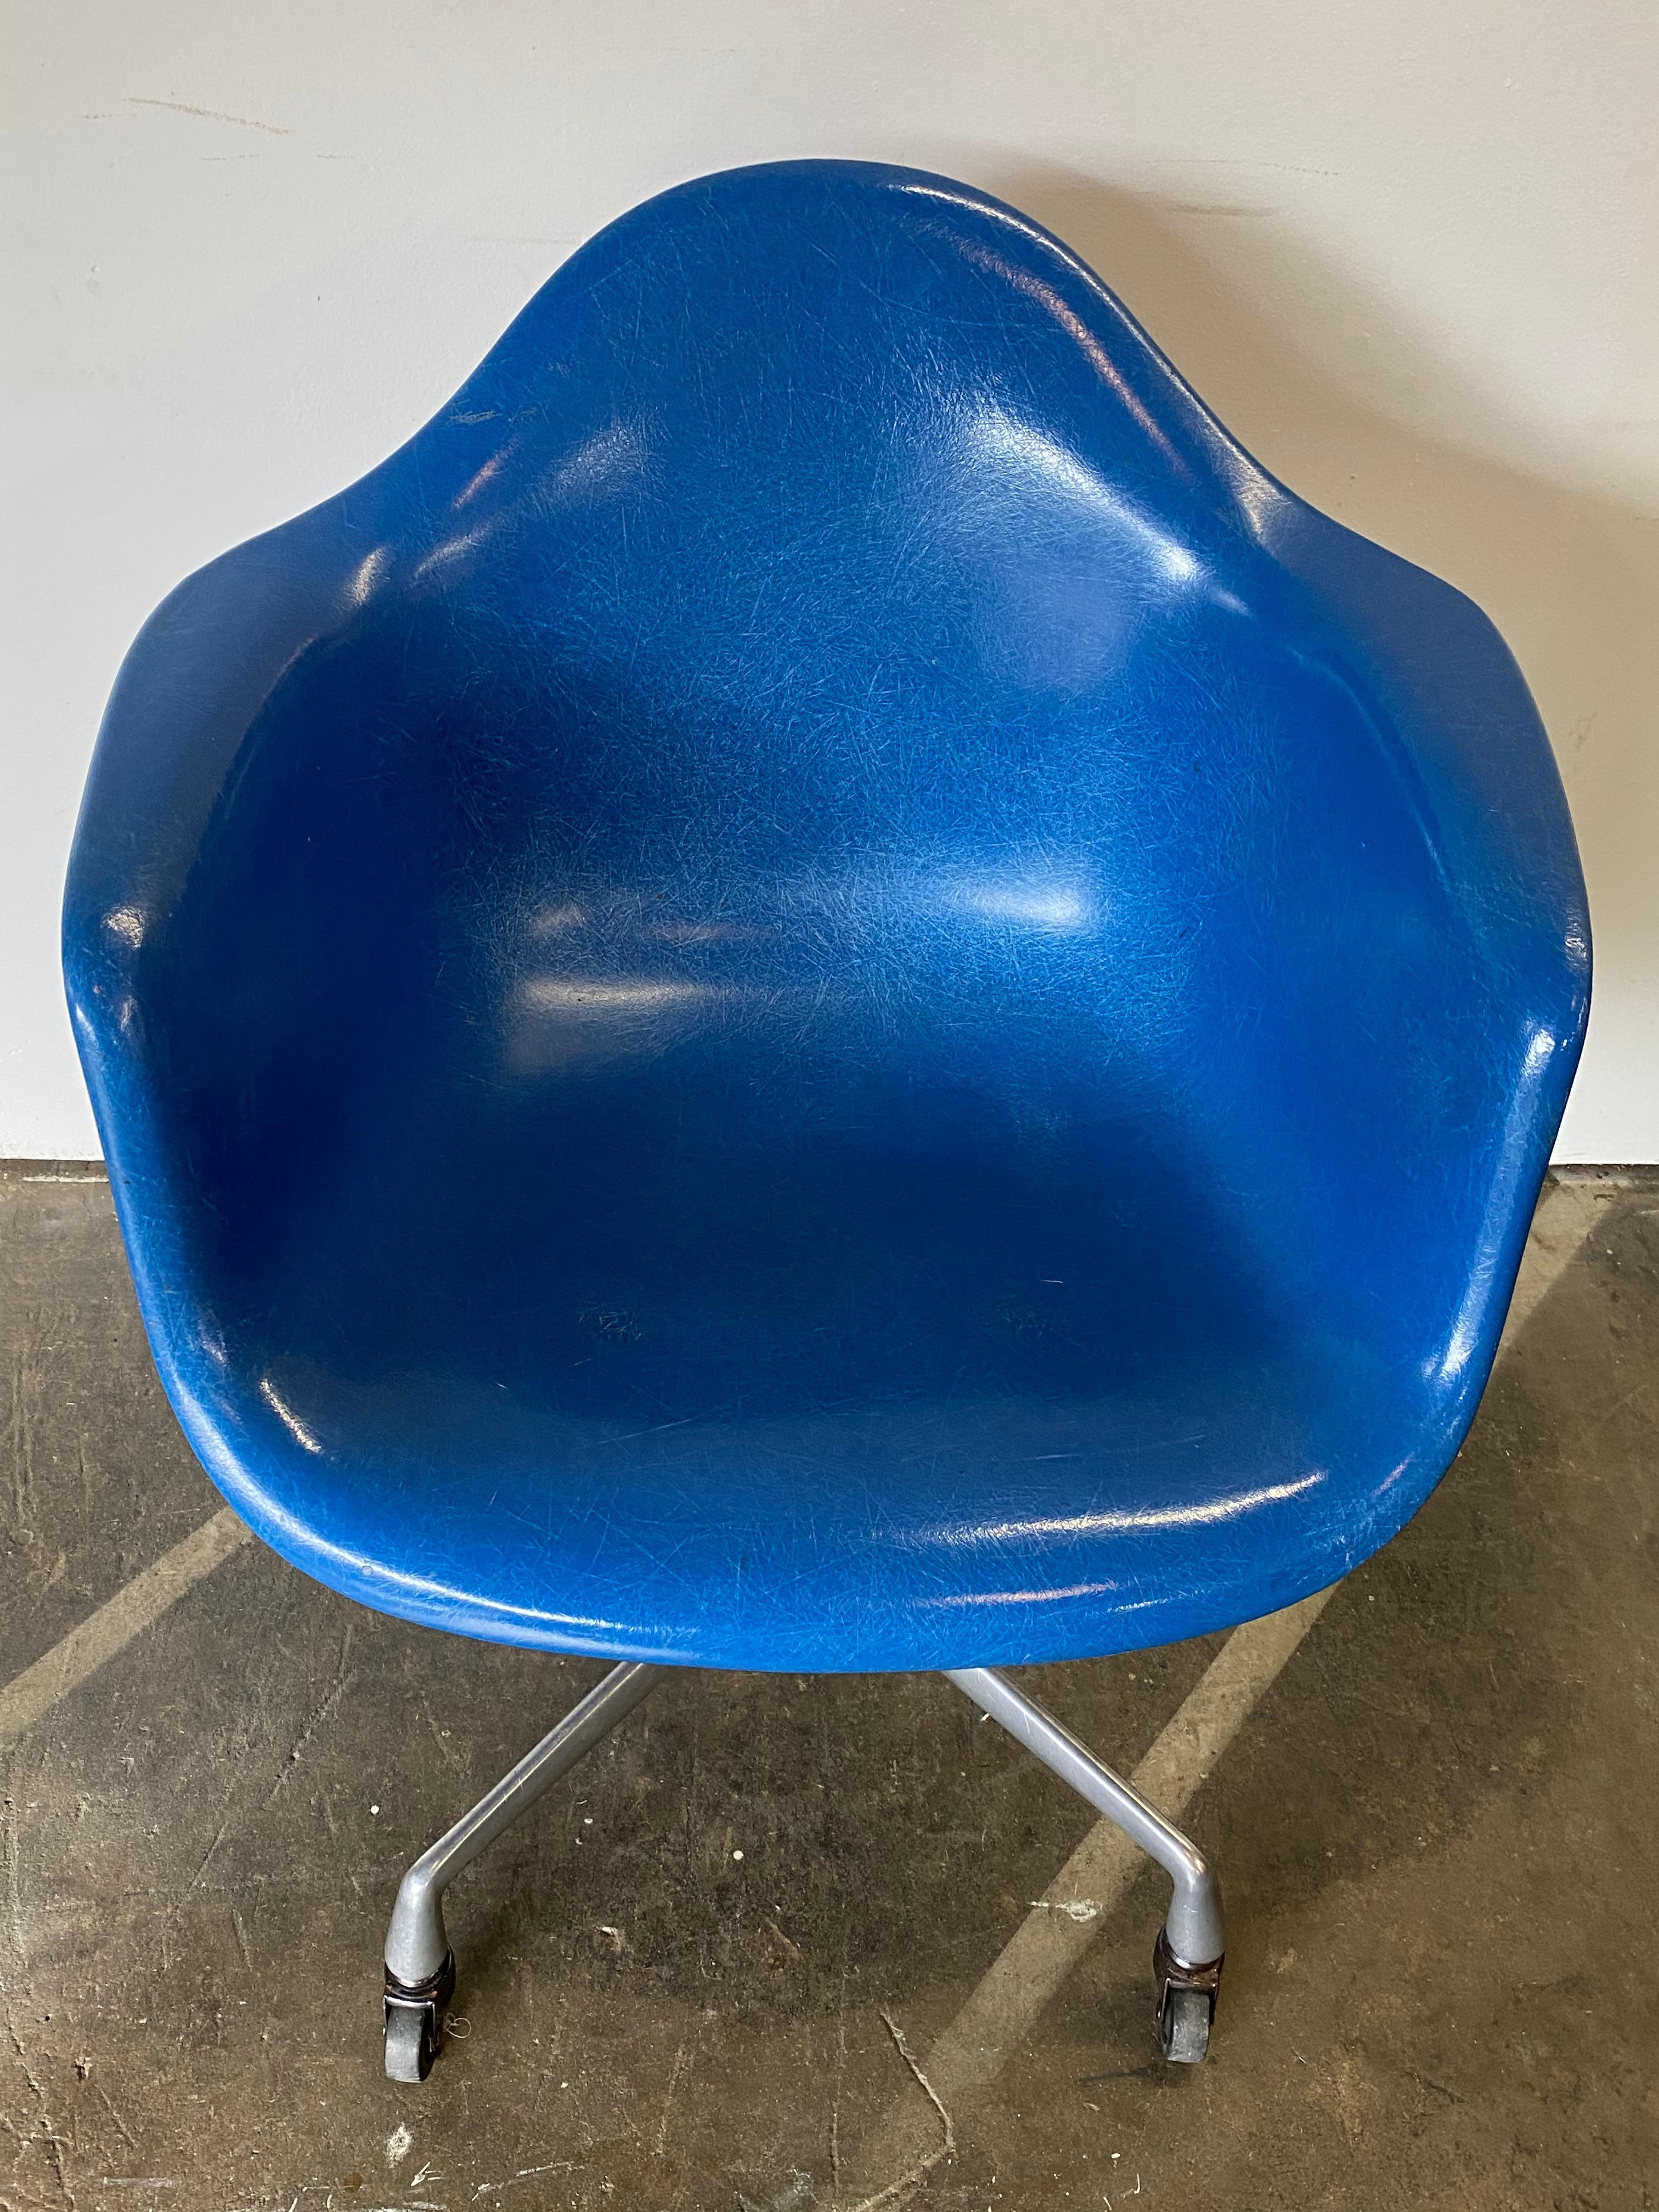 One of the most sought after colors in Eames shell chairs: Ultramarine blue. This chair has bright bold color with no sun fading. Signed Herman Miller and guaranteed authentic. Sits atop rare Herman Miller aluminum desk base. Swivels and rolls